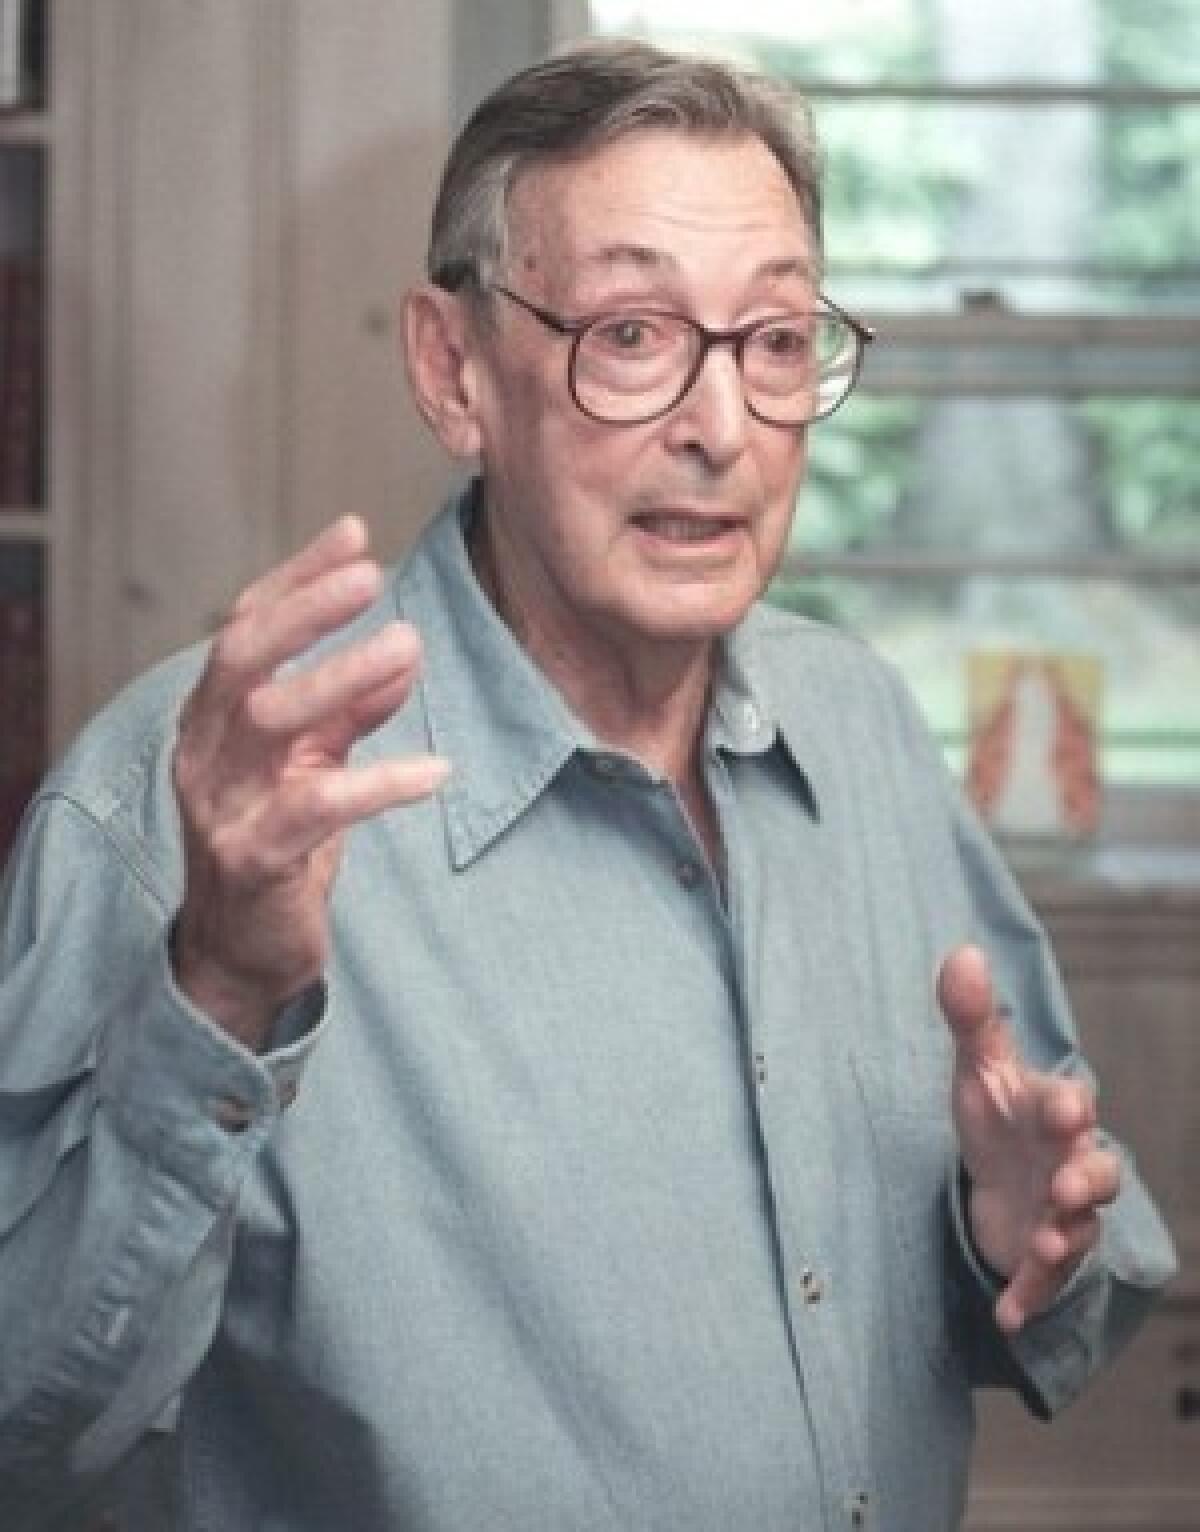 Robert Furchgott and two other American scientists shared the 1998 Nobel Prize for Physiology or Medicine for work involving the function of nitric oxide in the body.